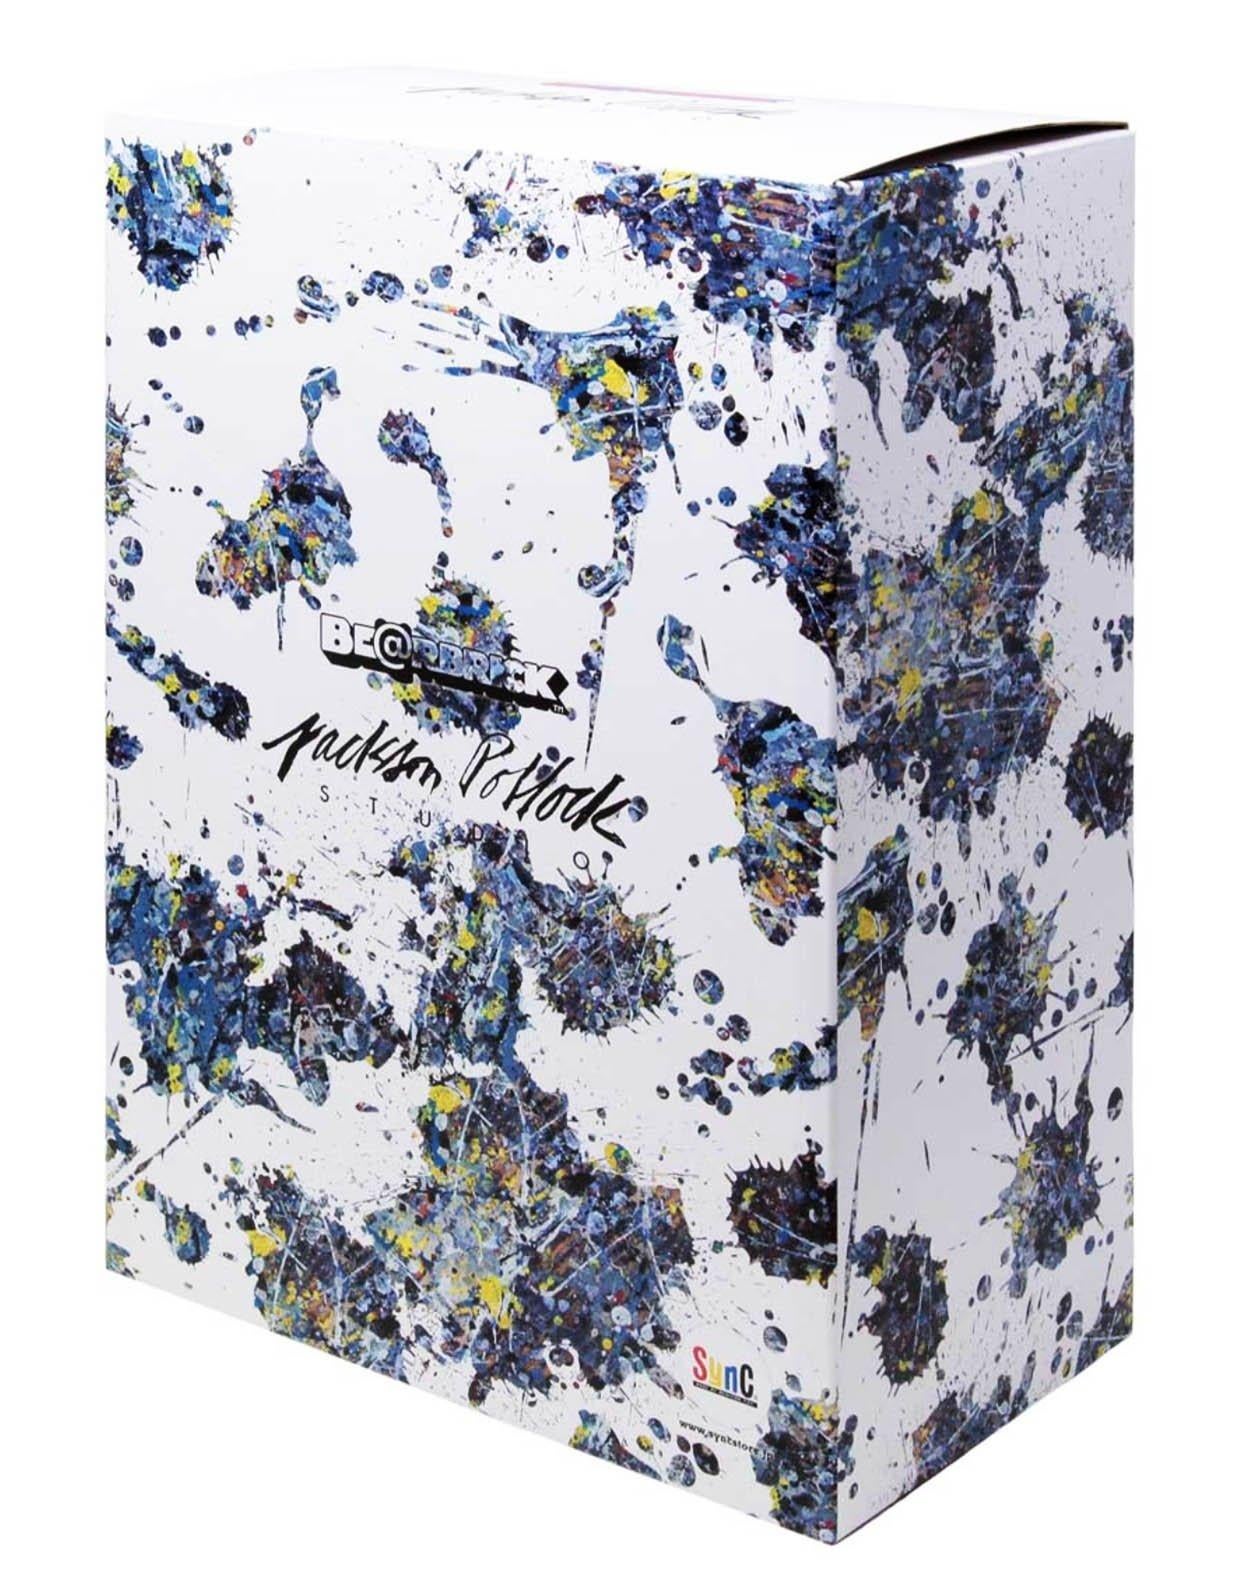 BEARBRICK - JACKSON POLLOCK (V3) SPLASH 400% & 100%
Date of creation: 2021
Medium: Vinyl figure
Edition: Open
Size: 28 x 10 x 10 cm
Condition: In mint conditions, inside its original package
Observations:
Vinyl figure published in 2021 by Medicom